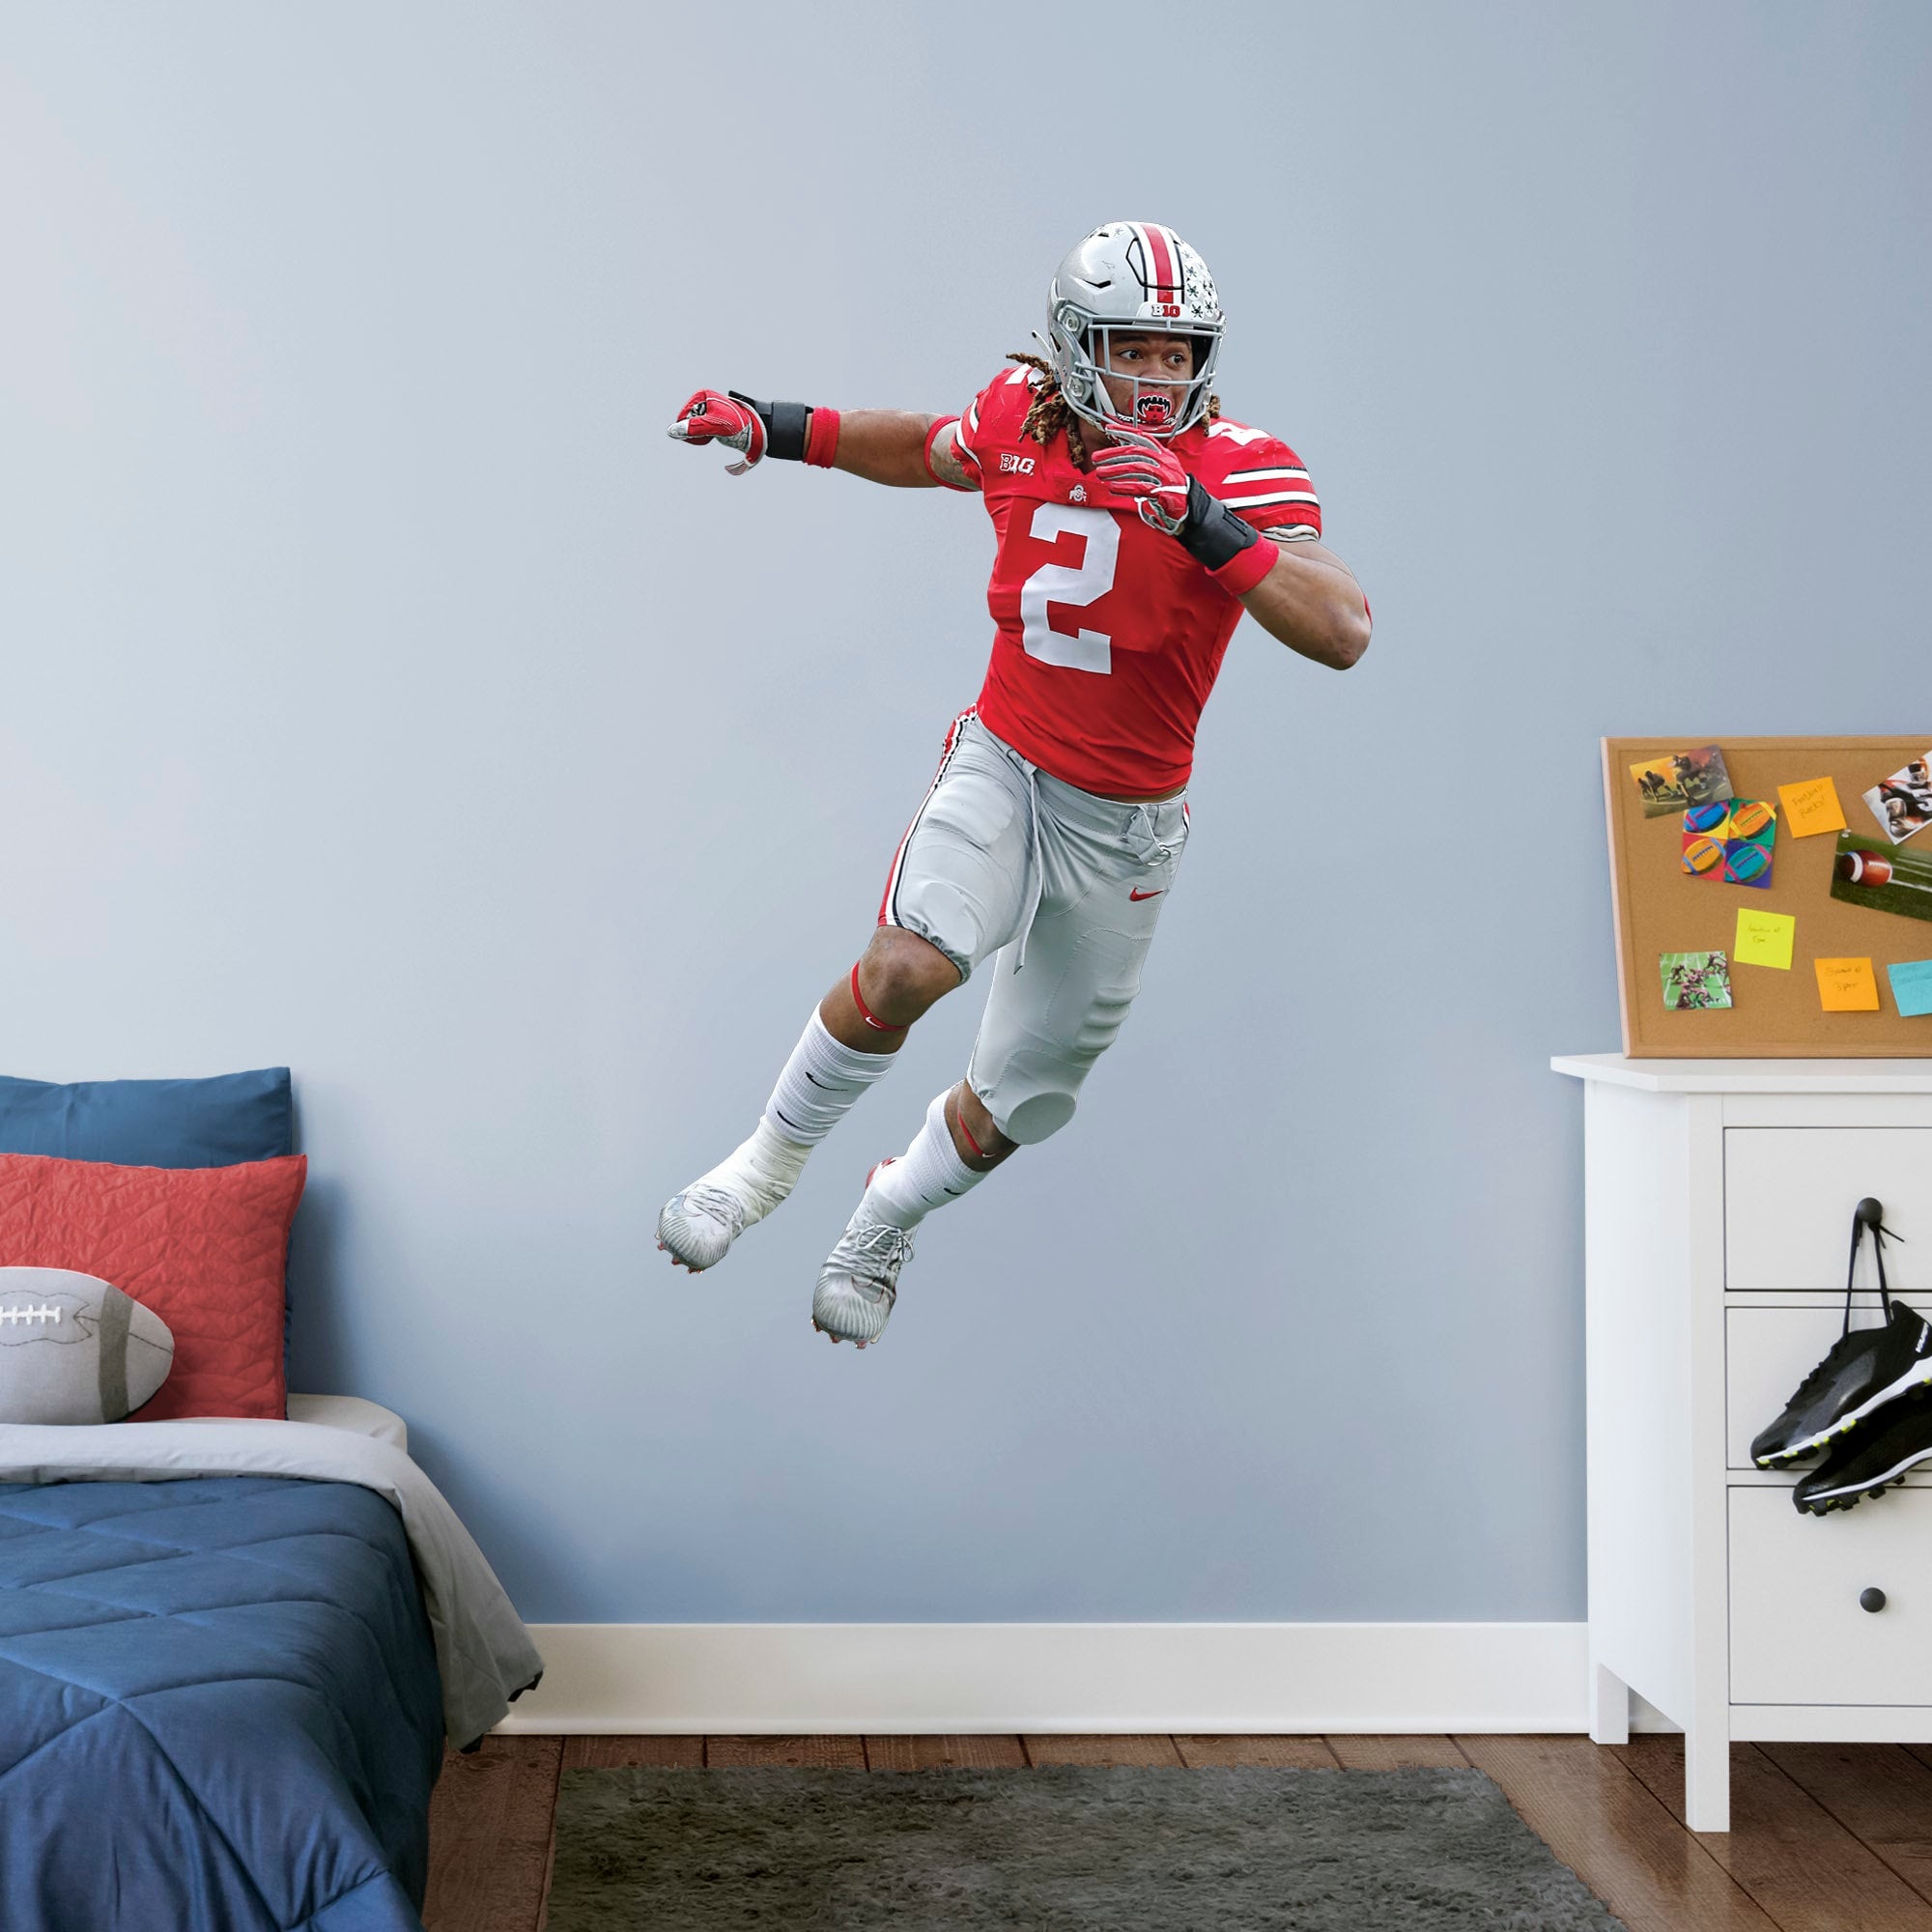 Chase Young for Ohio State Buckeyes: Ohio State - Officially Licensed Removable Wall Decal Giant Athlete + 2 Decals (24"W x 38"H